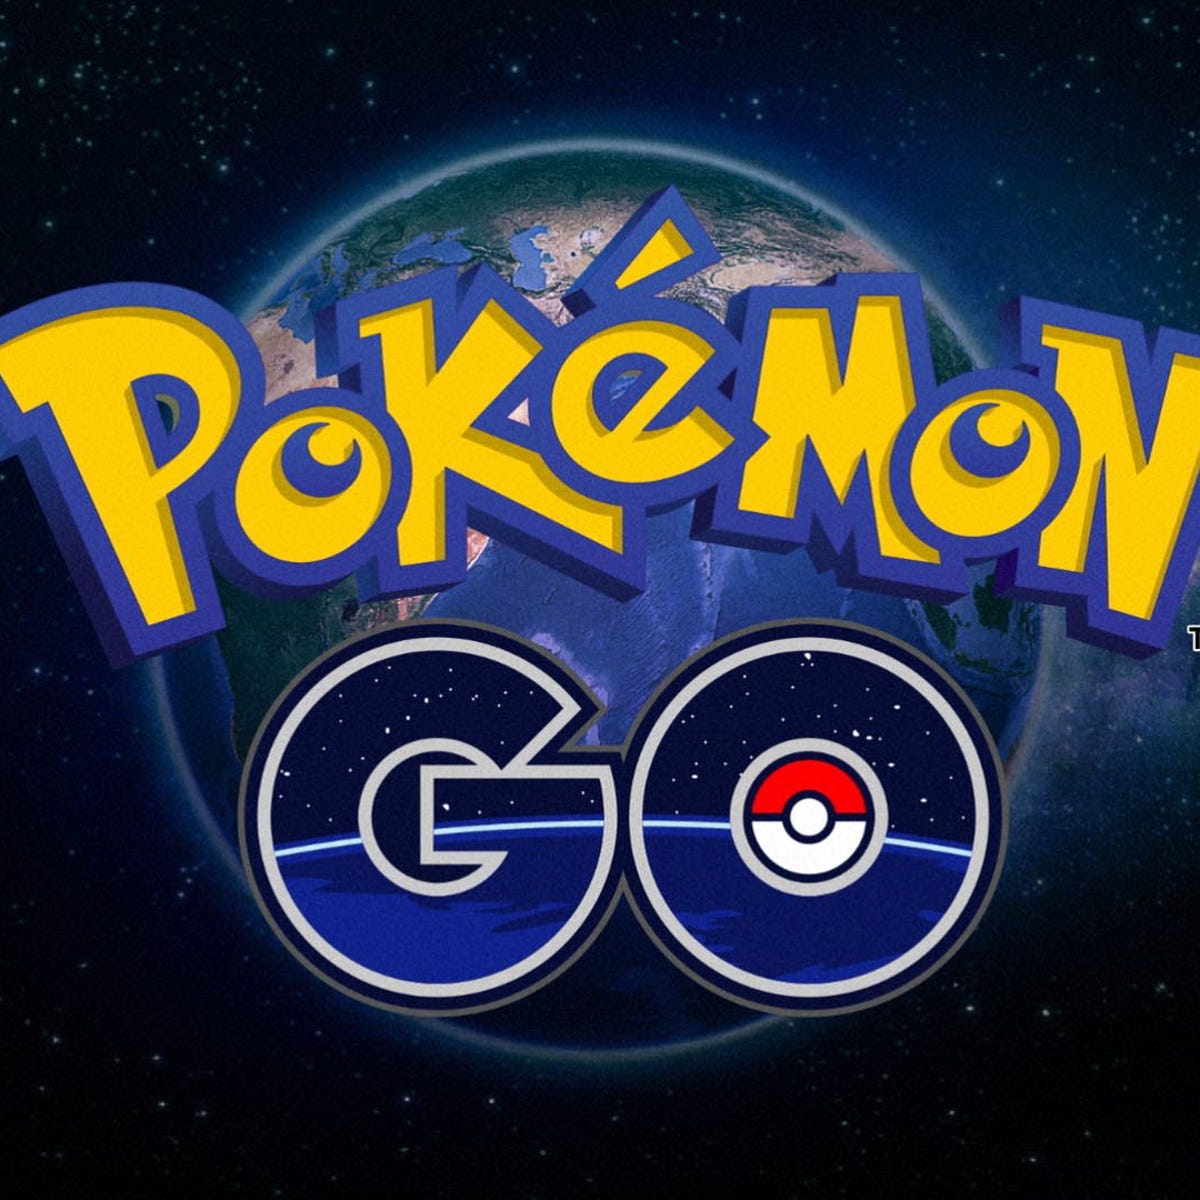 Pokemon Go now lets you 